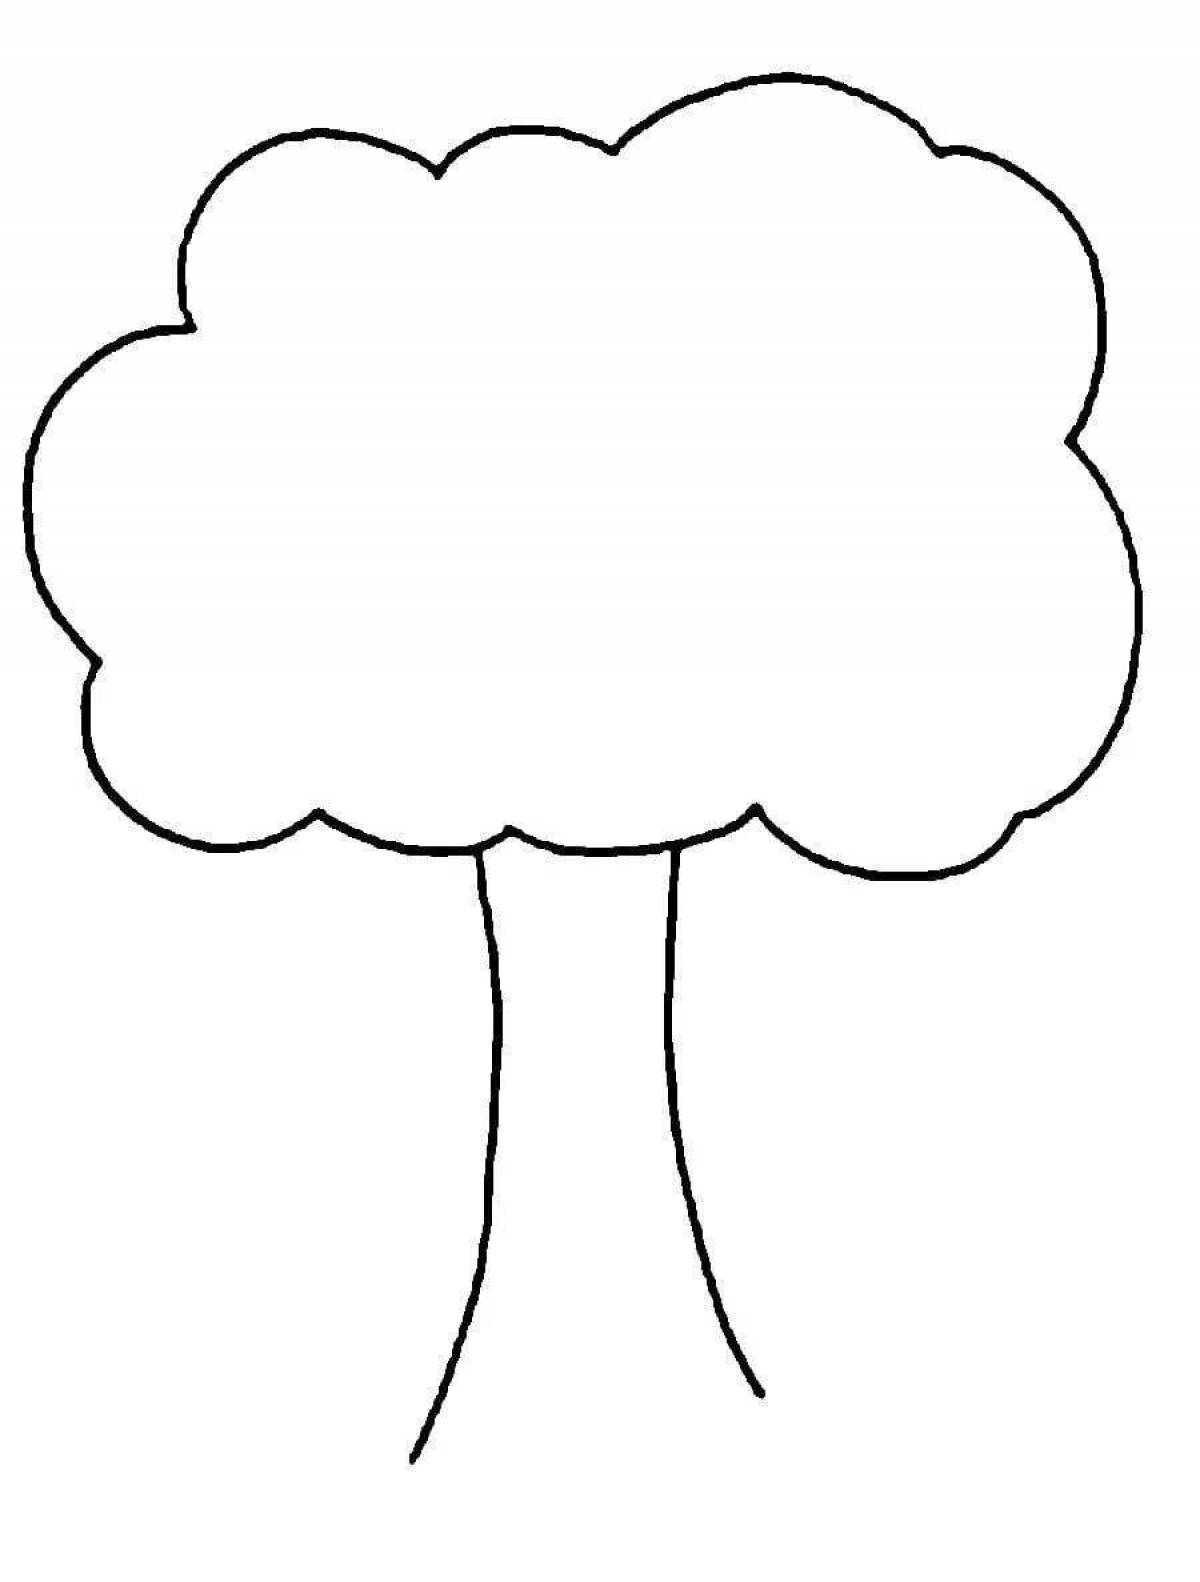 Coloring page of a tree with a bright pattern